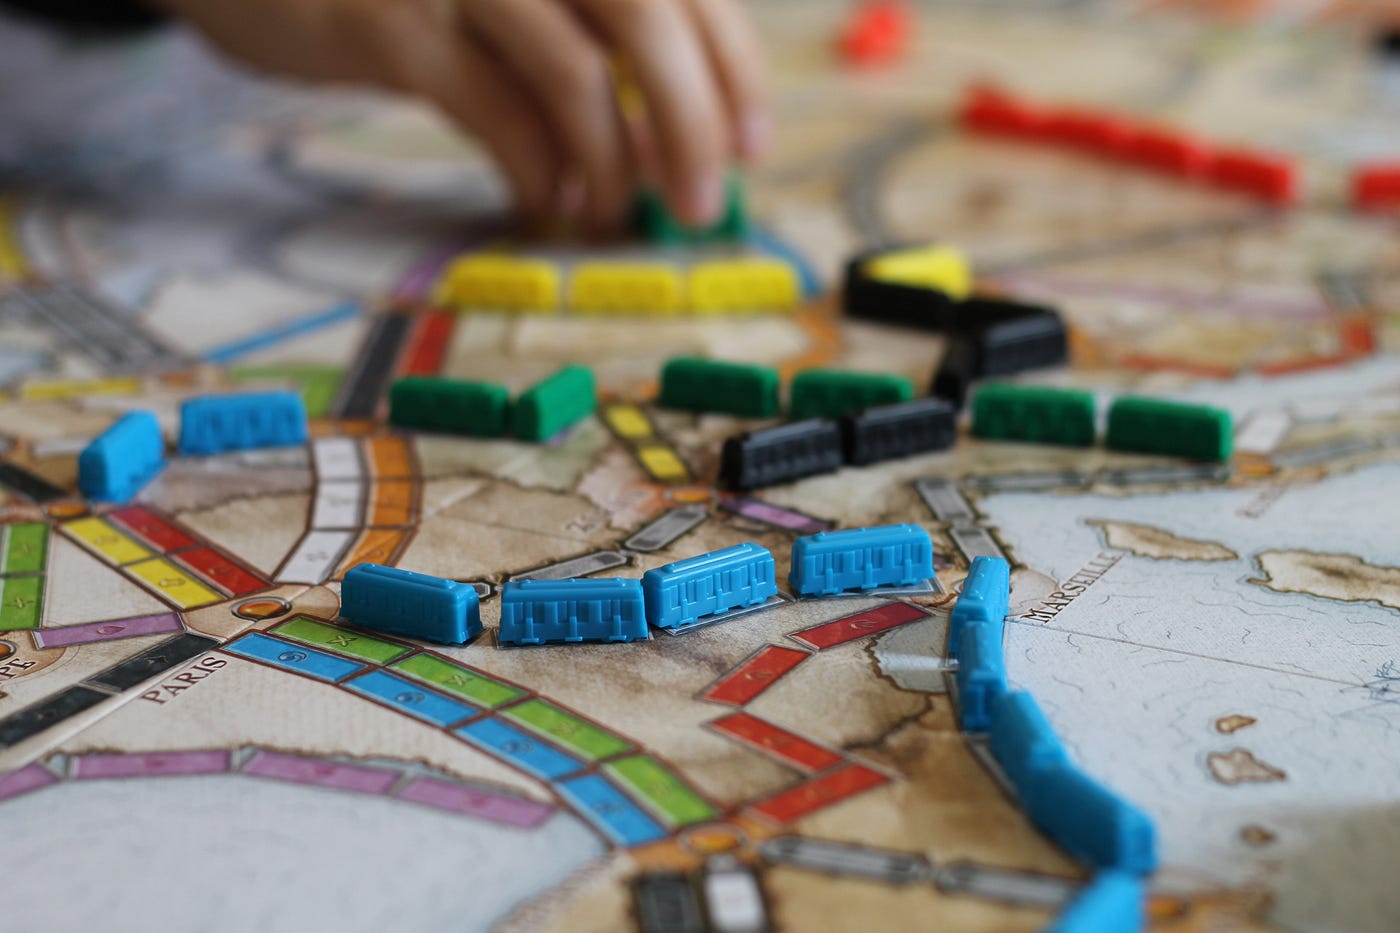 Board game map with train lines filled with tiny trains of multiple colors